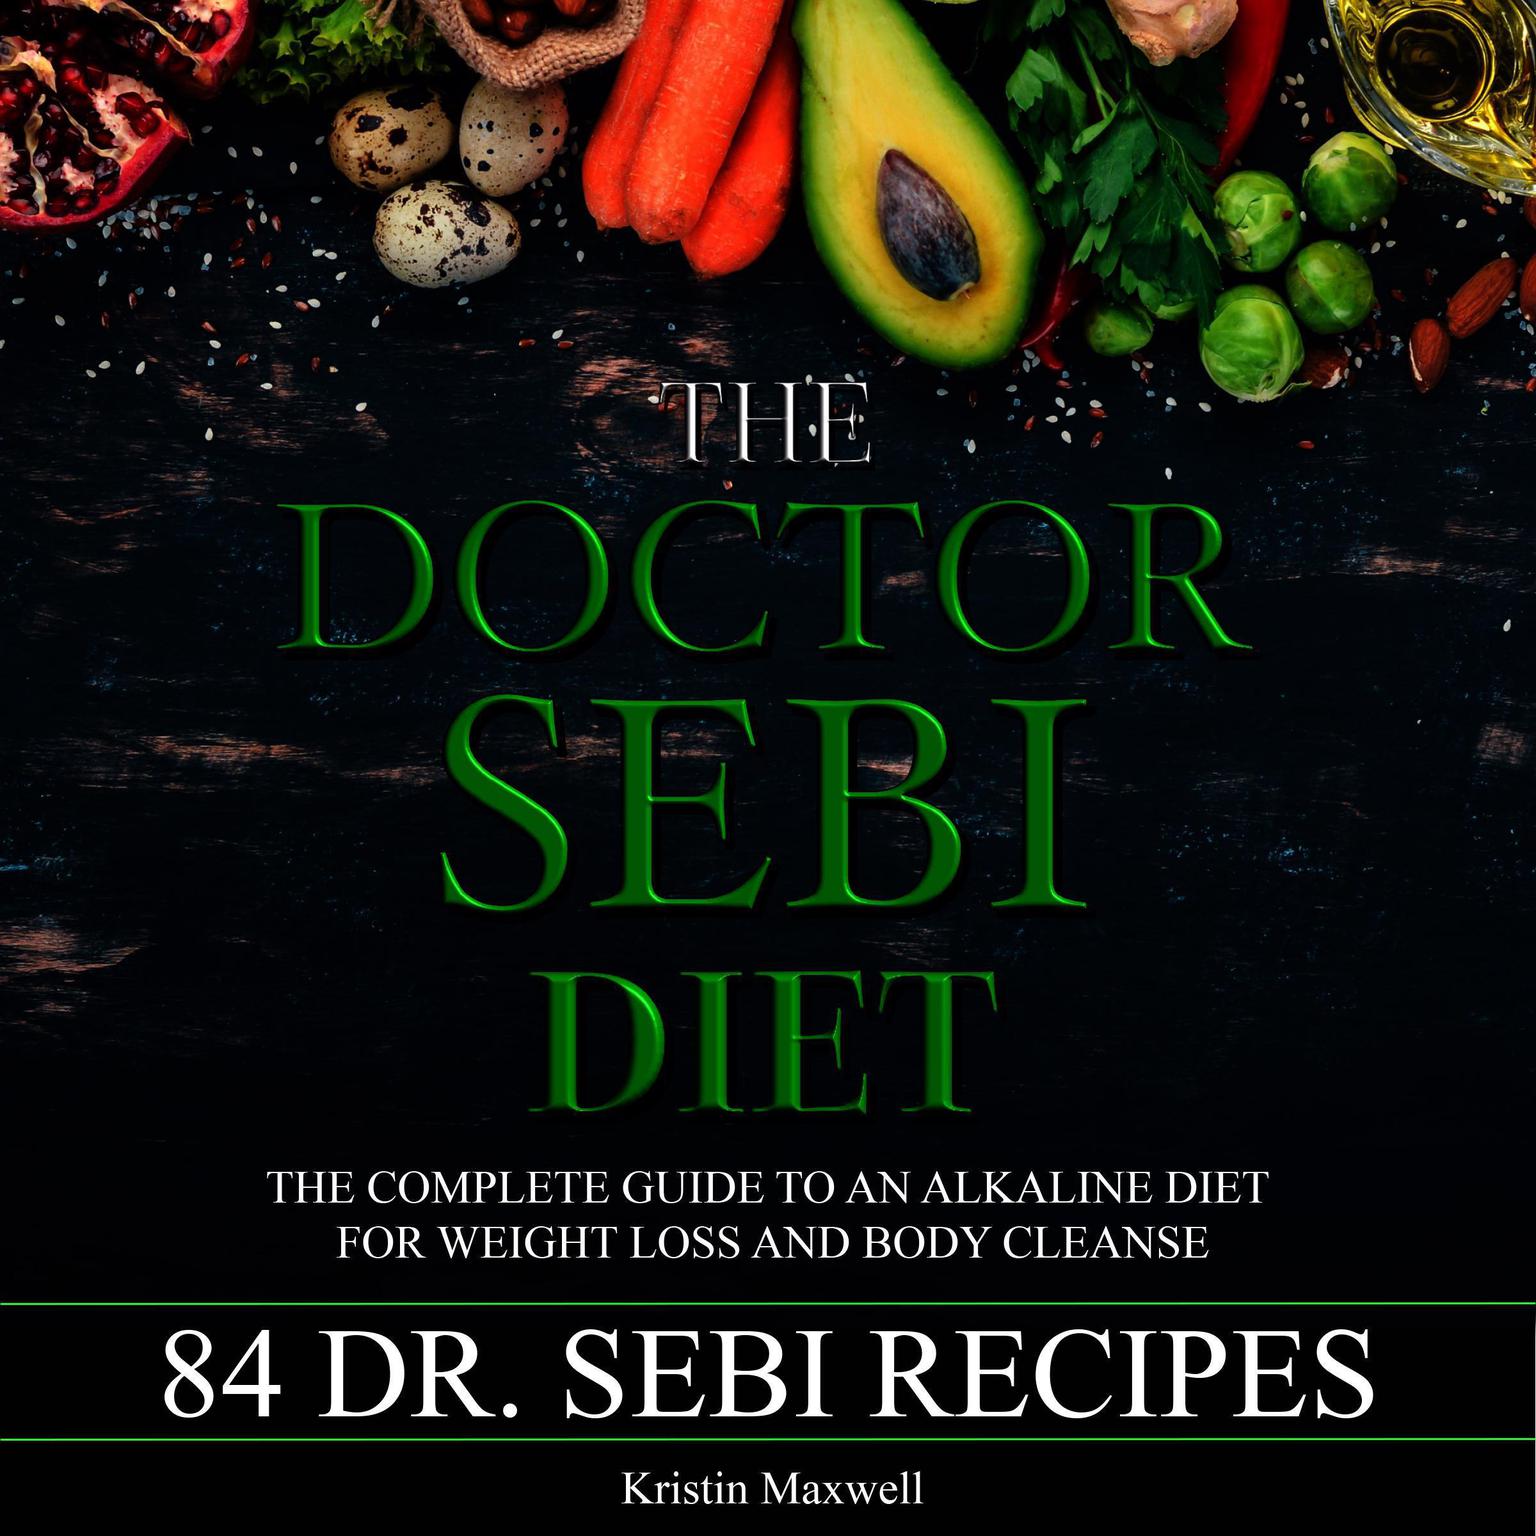 The Doctor Sebi Diet: The Complete Guide To An Alkaline Diet For Weight Loss And Body Cleanse Audiobook, by Kristin Maxwell